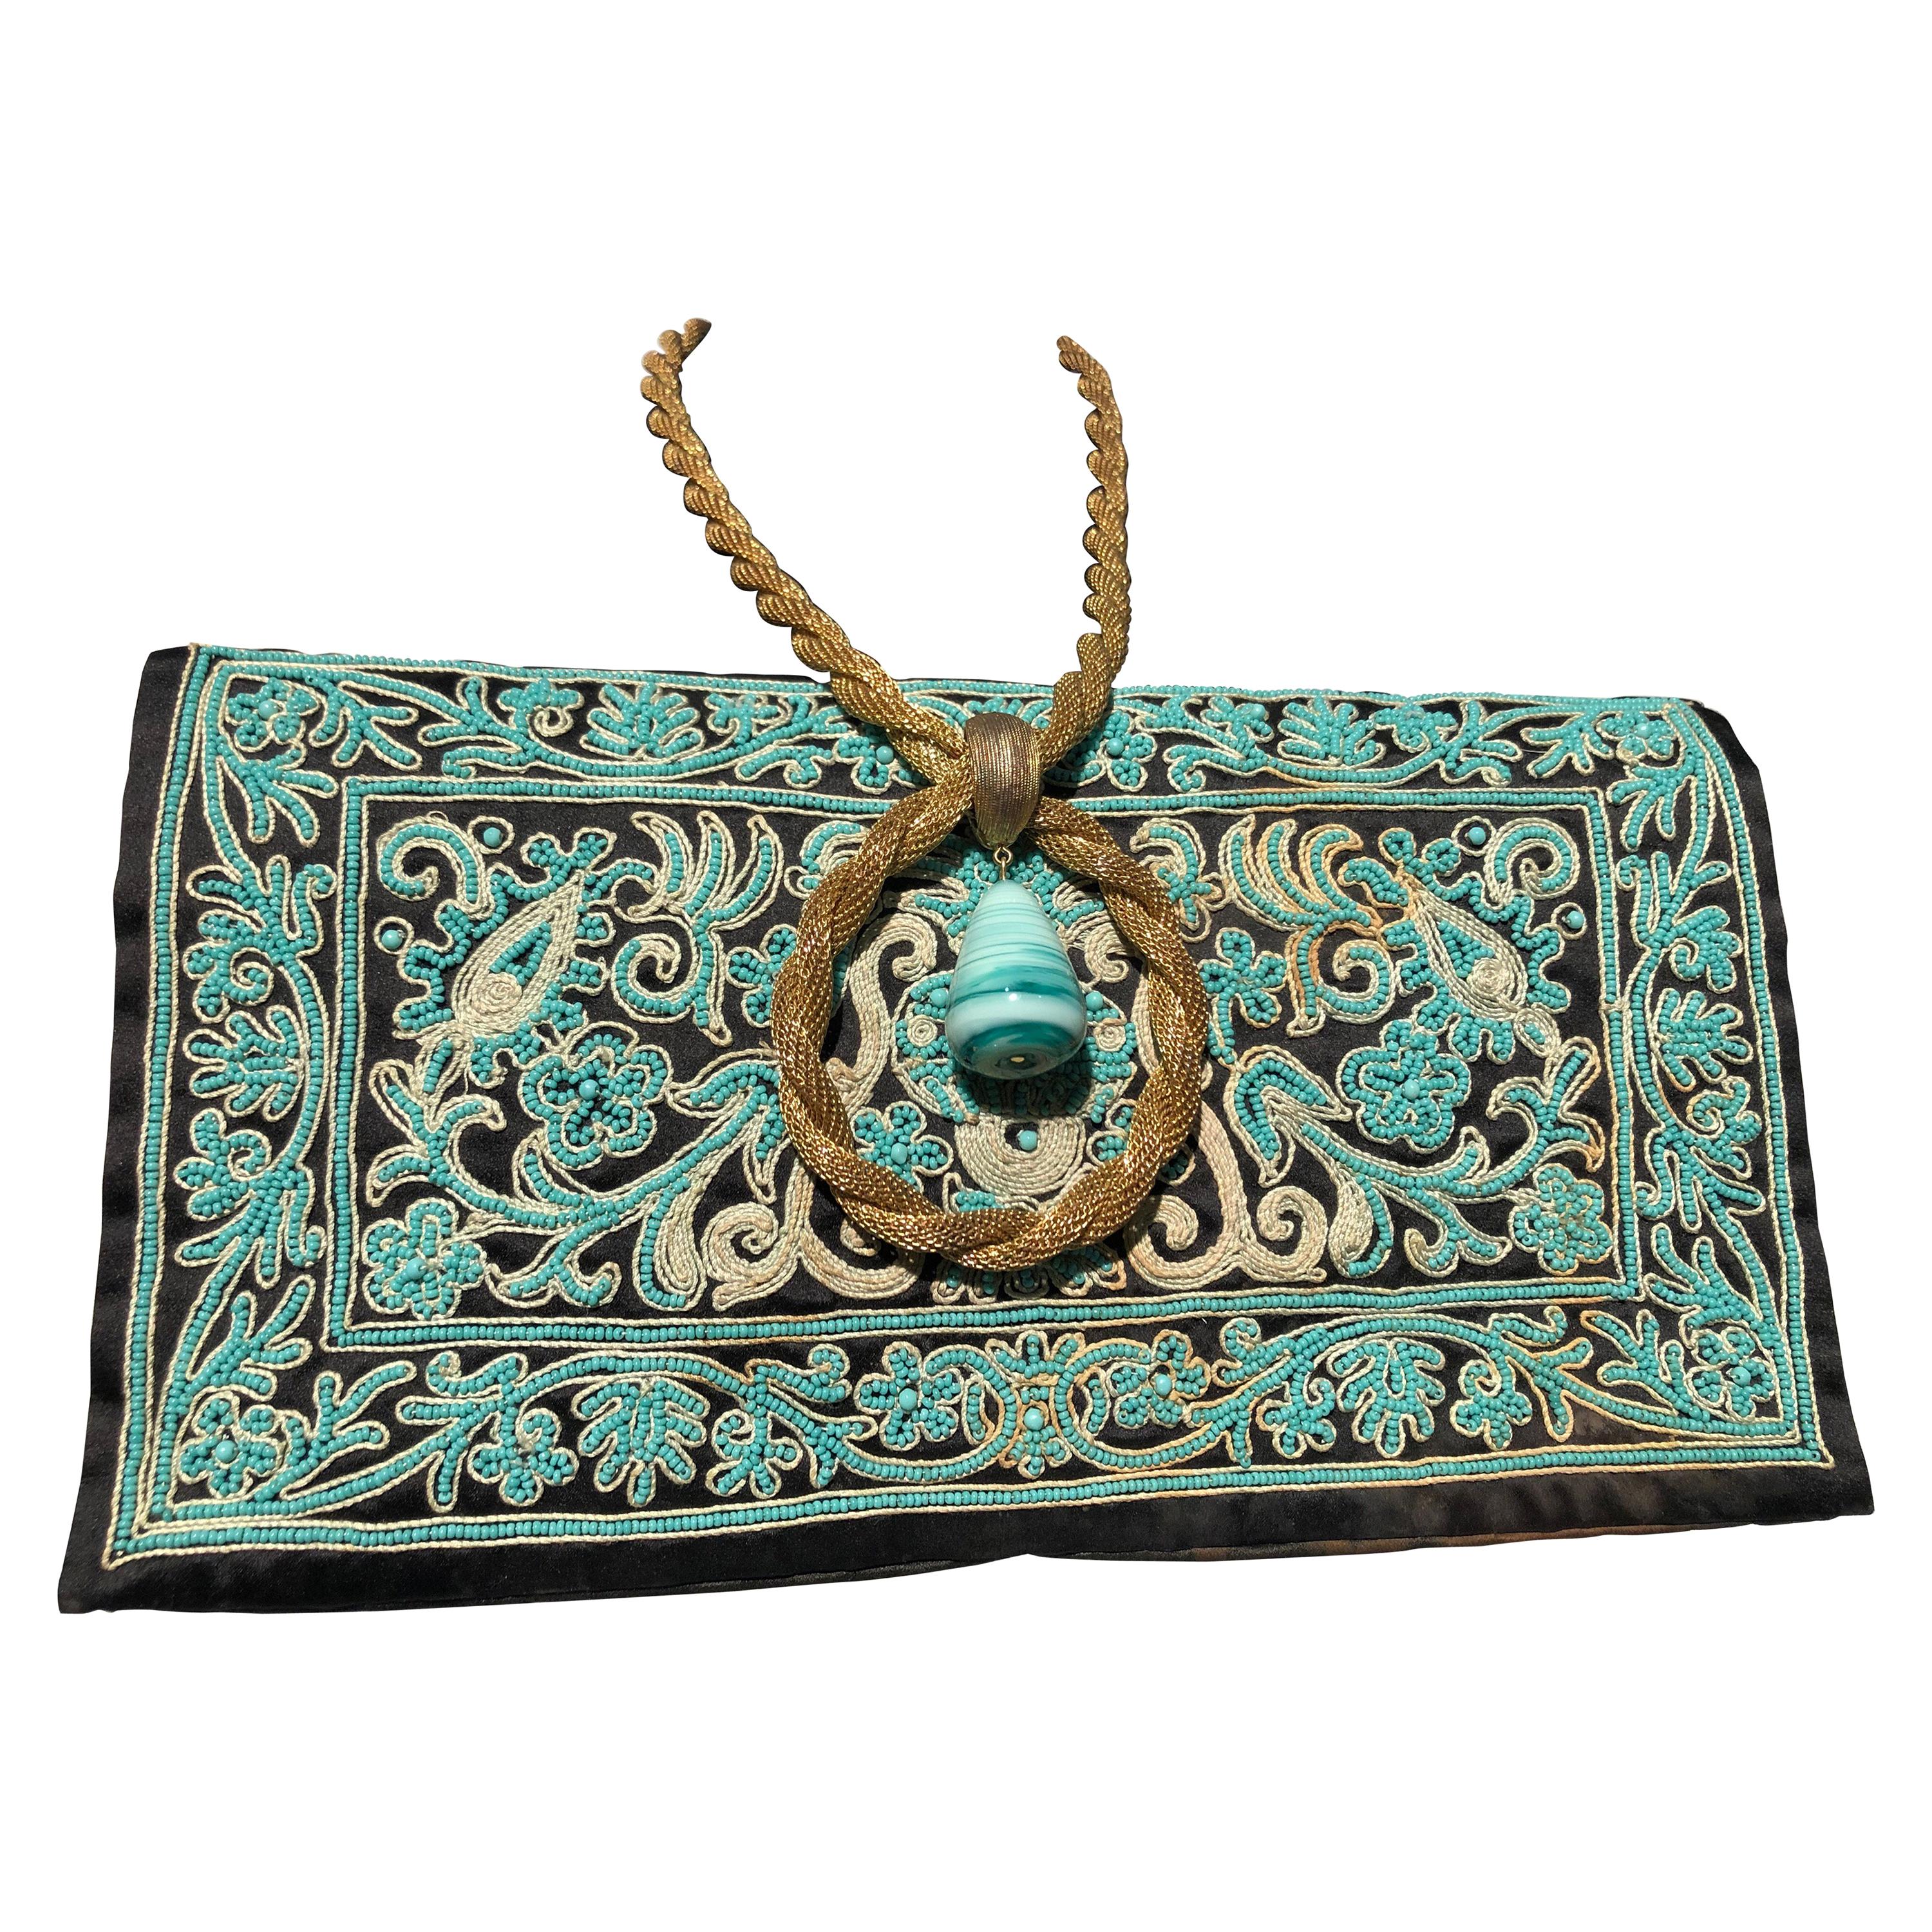 1940s Henry Rosenfeld Turquoise & Gold Embroidered Envelope Clutch W/ Necklace 